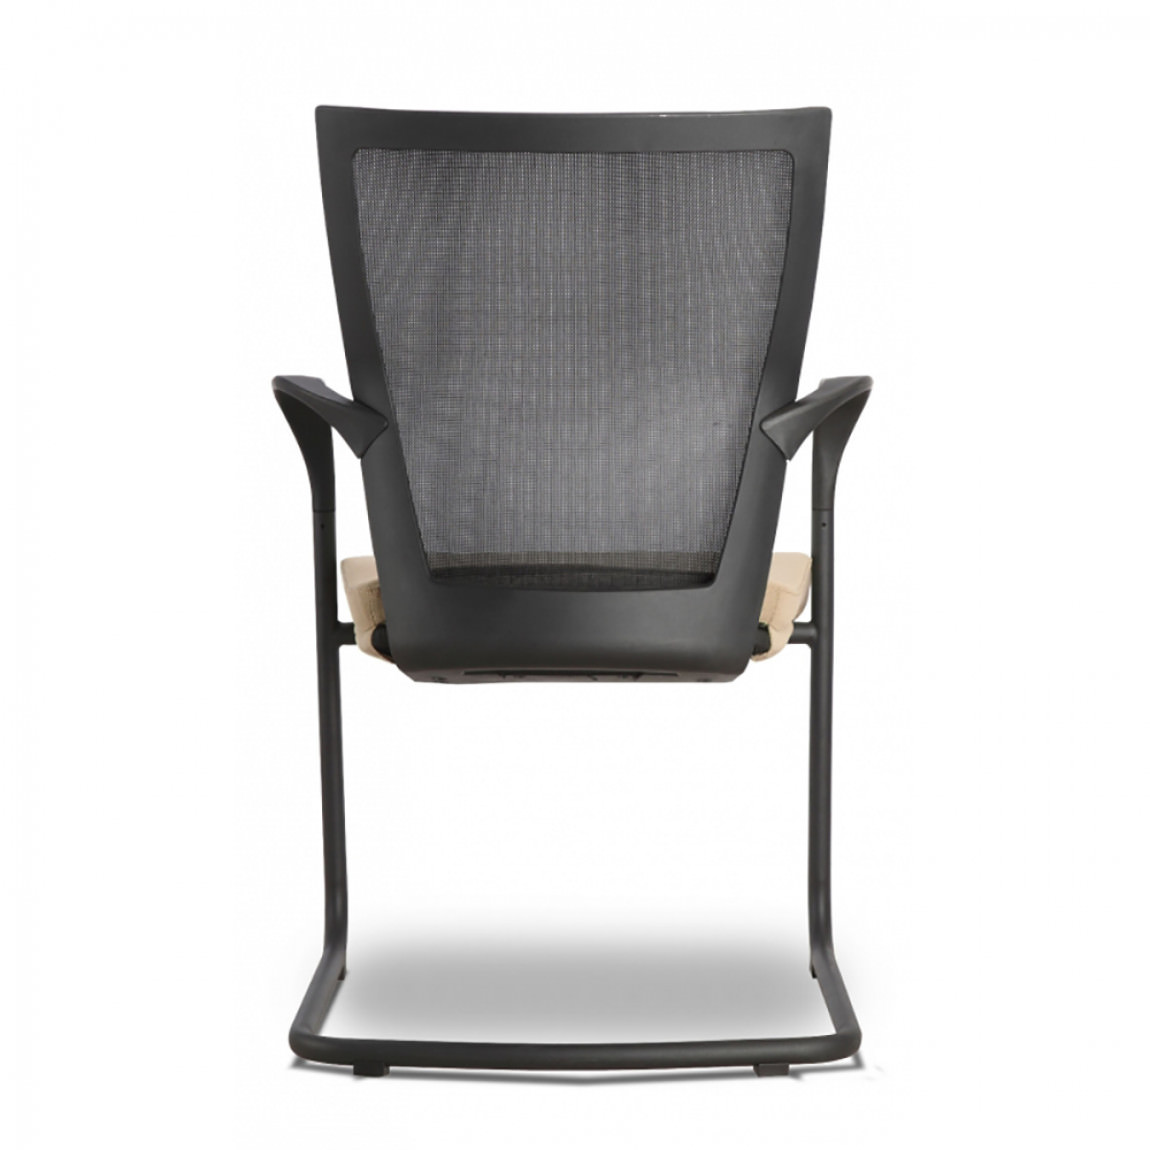 Stacking Guest Chair with Tan Seat Cover